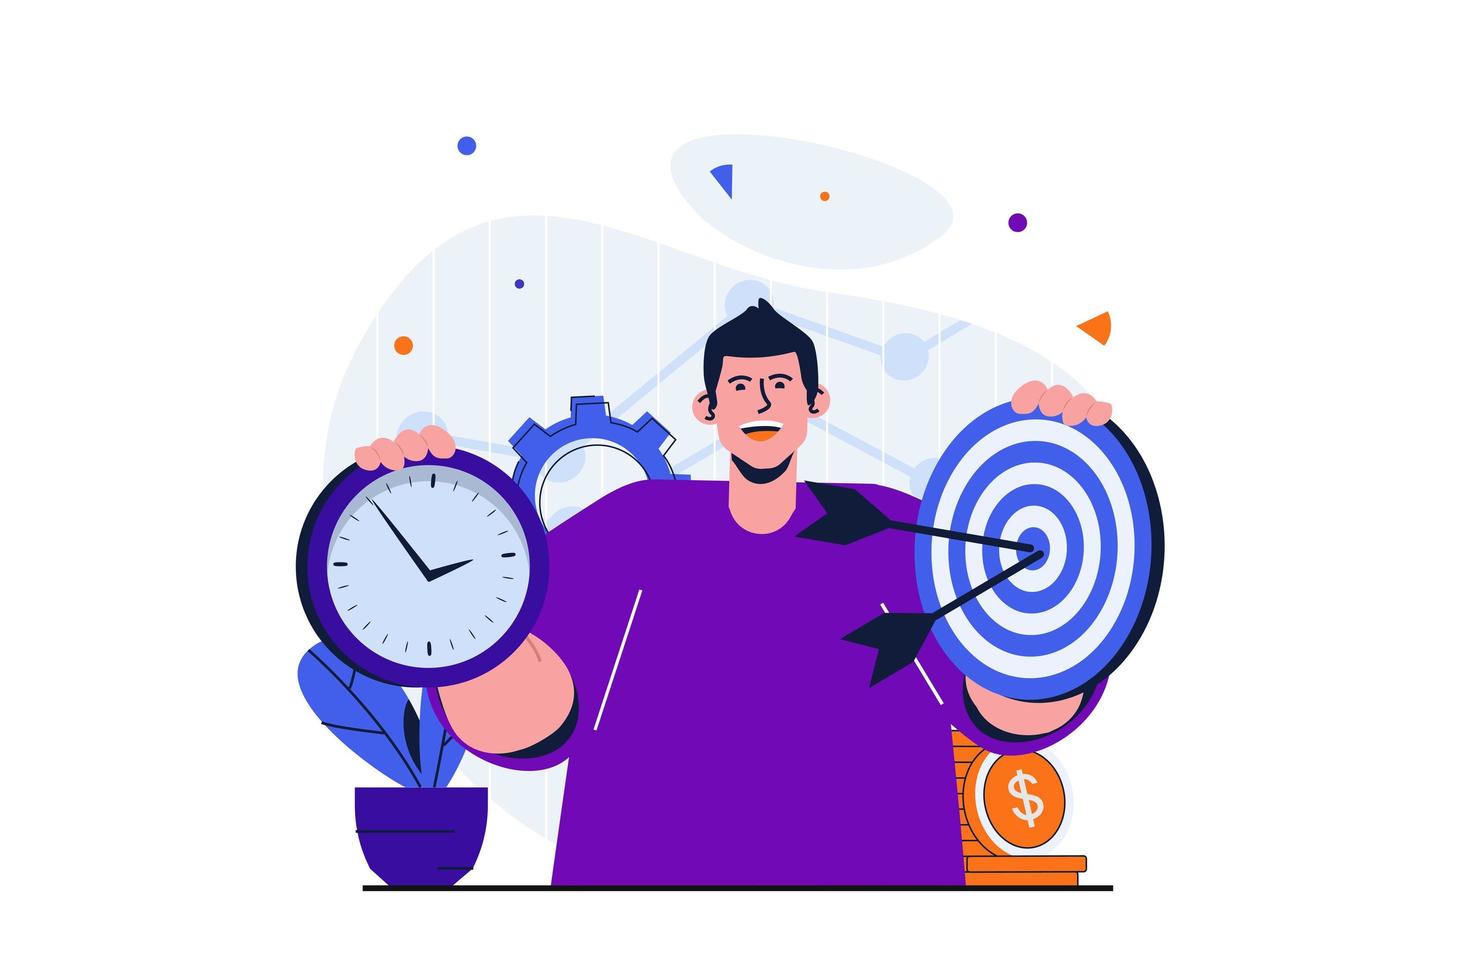 Business target modern flat concept for web banner design. Businessman holding target and clock. Time management, work deadlines and achieving goals. Vector illustration with isolated people scene